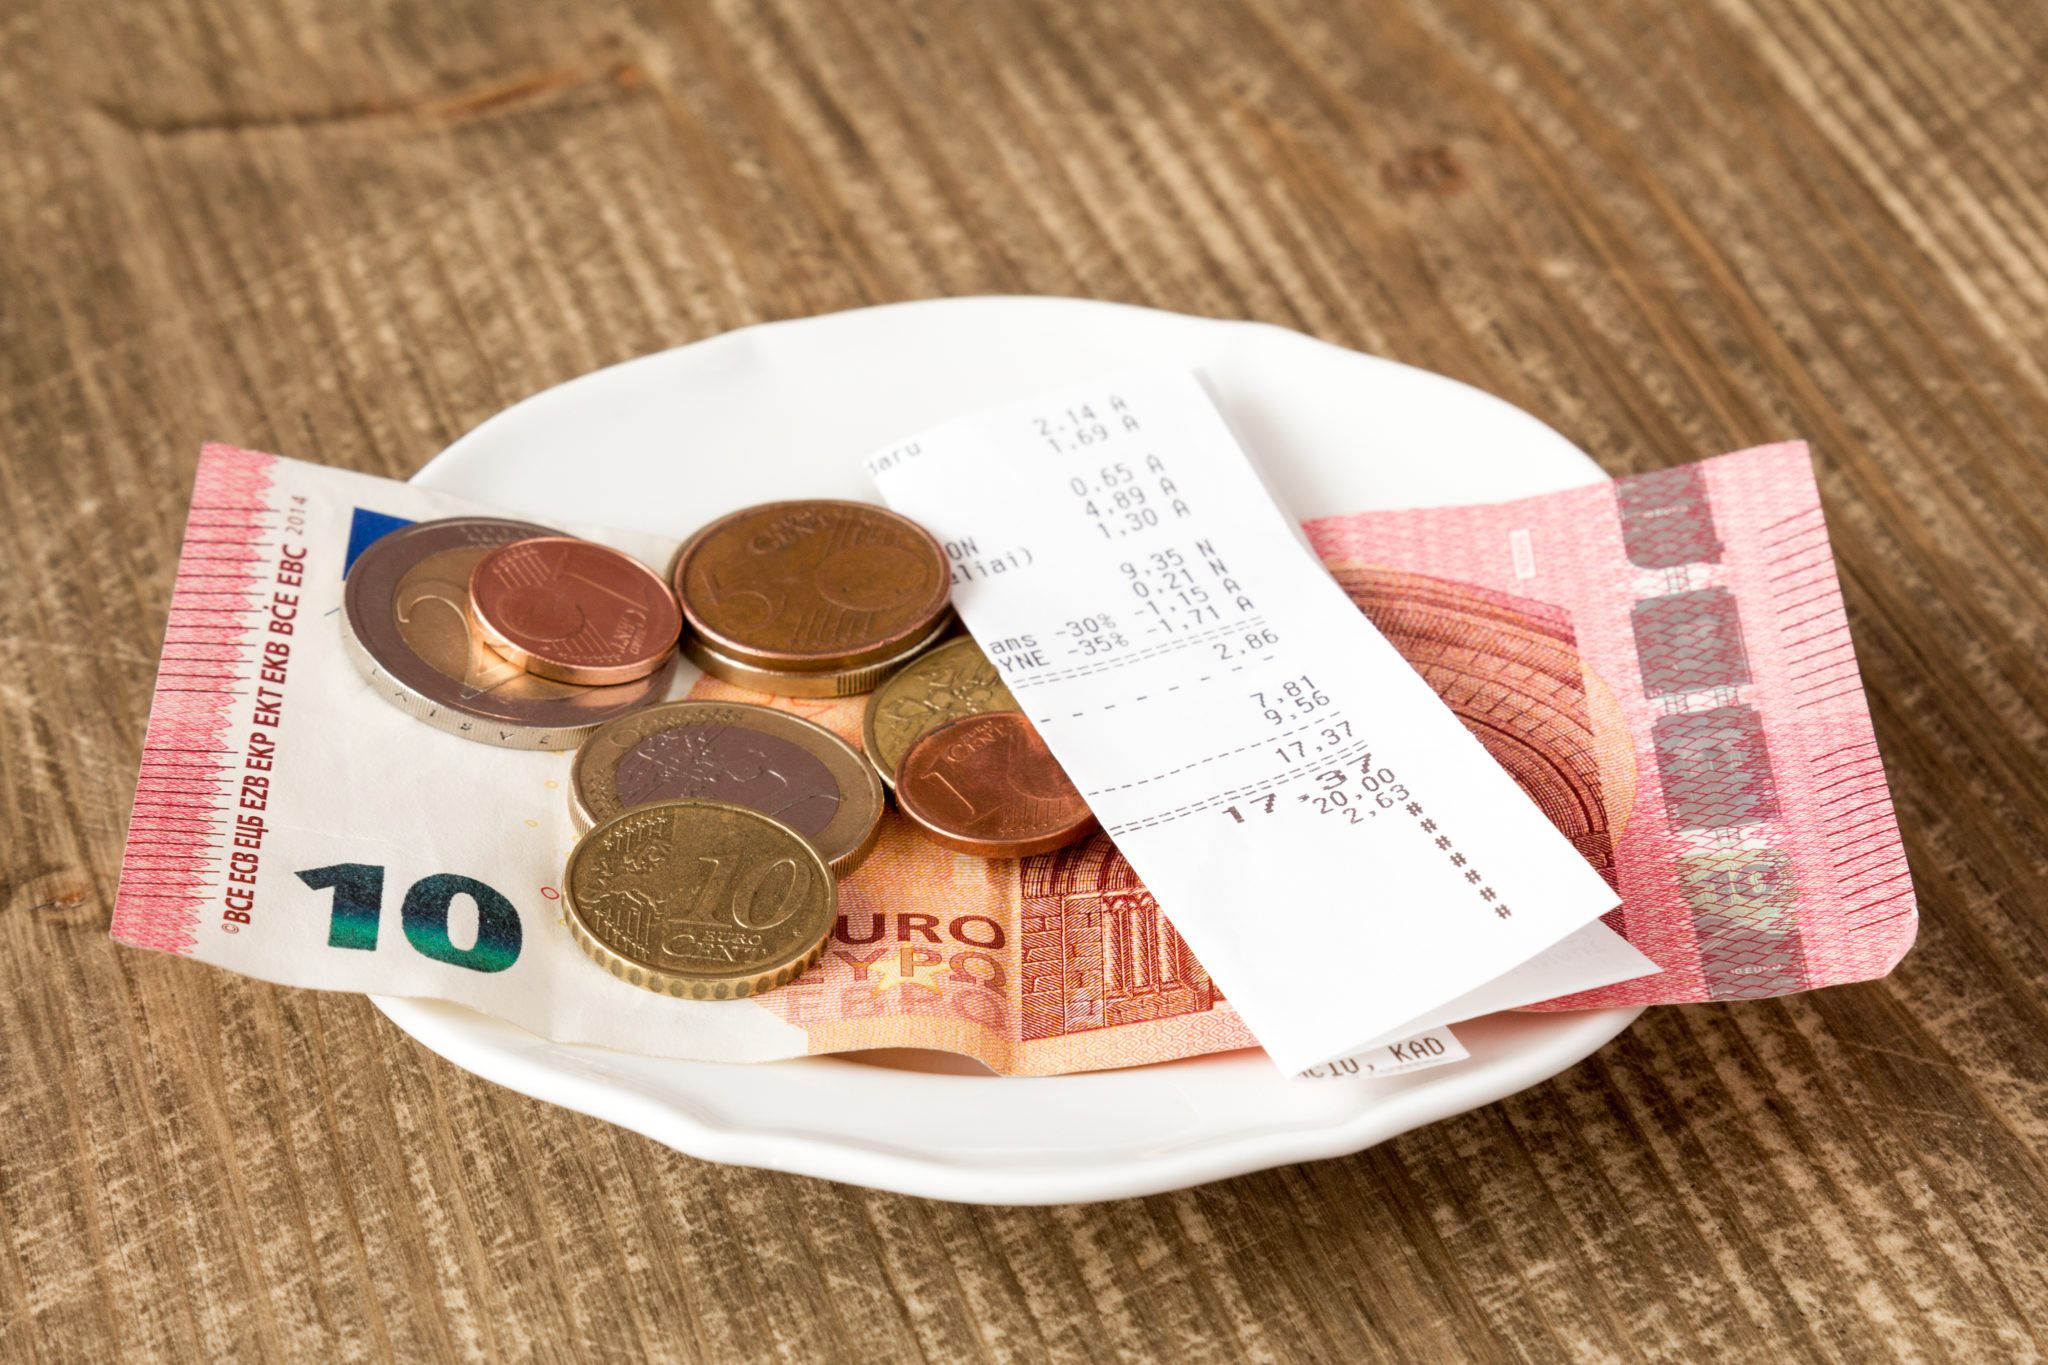 New tipping laws come into effect in Ireland today